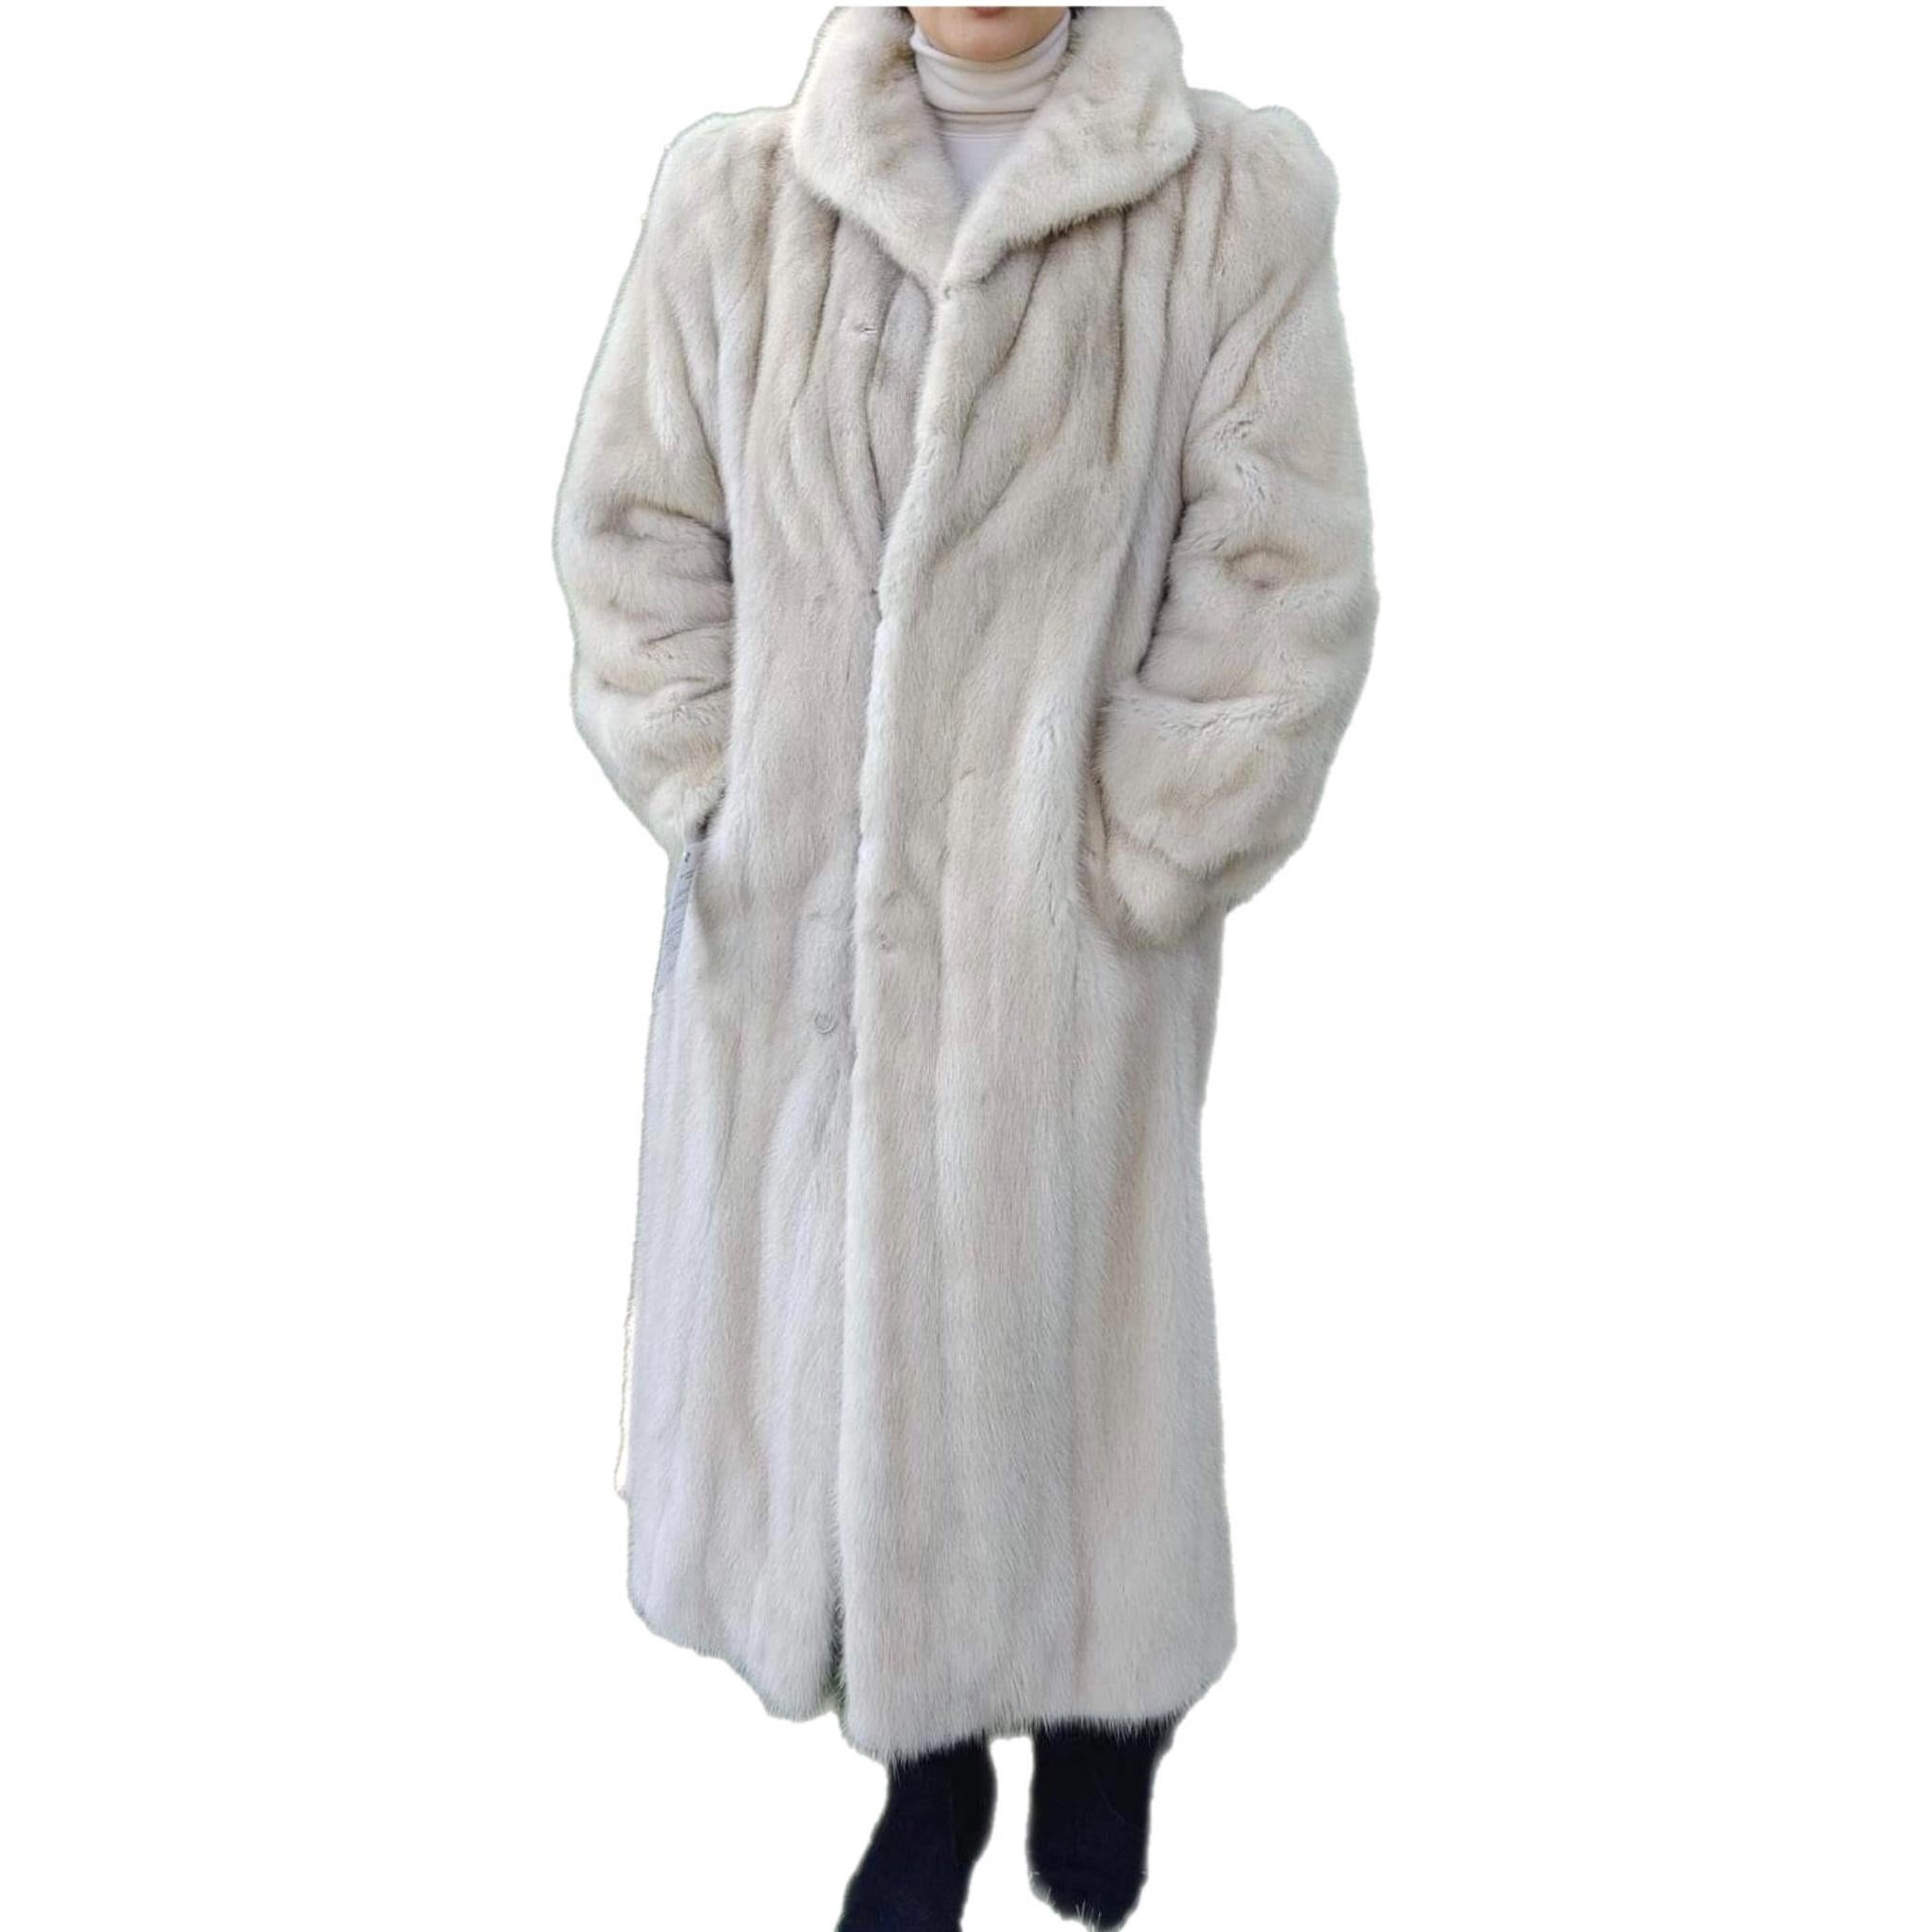 ~ Unused tourmaline light gray Mink Fur Coat (Size 10 - M) 

When it comes to fur, Canada Majestic is the ultimate reference in quality and style. This stunning blush coat is a classic with the trench design and short collar stitching workmanship.